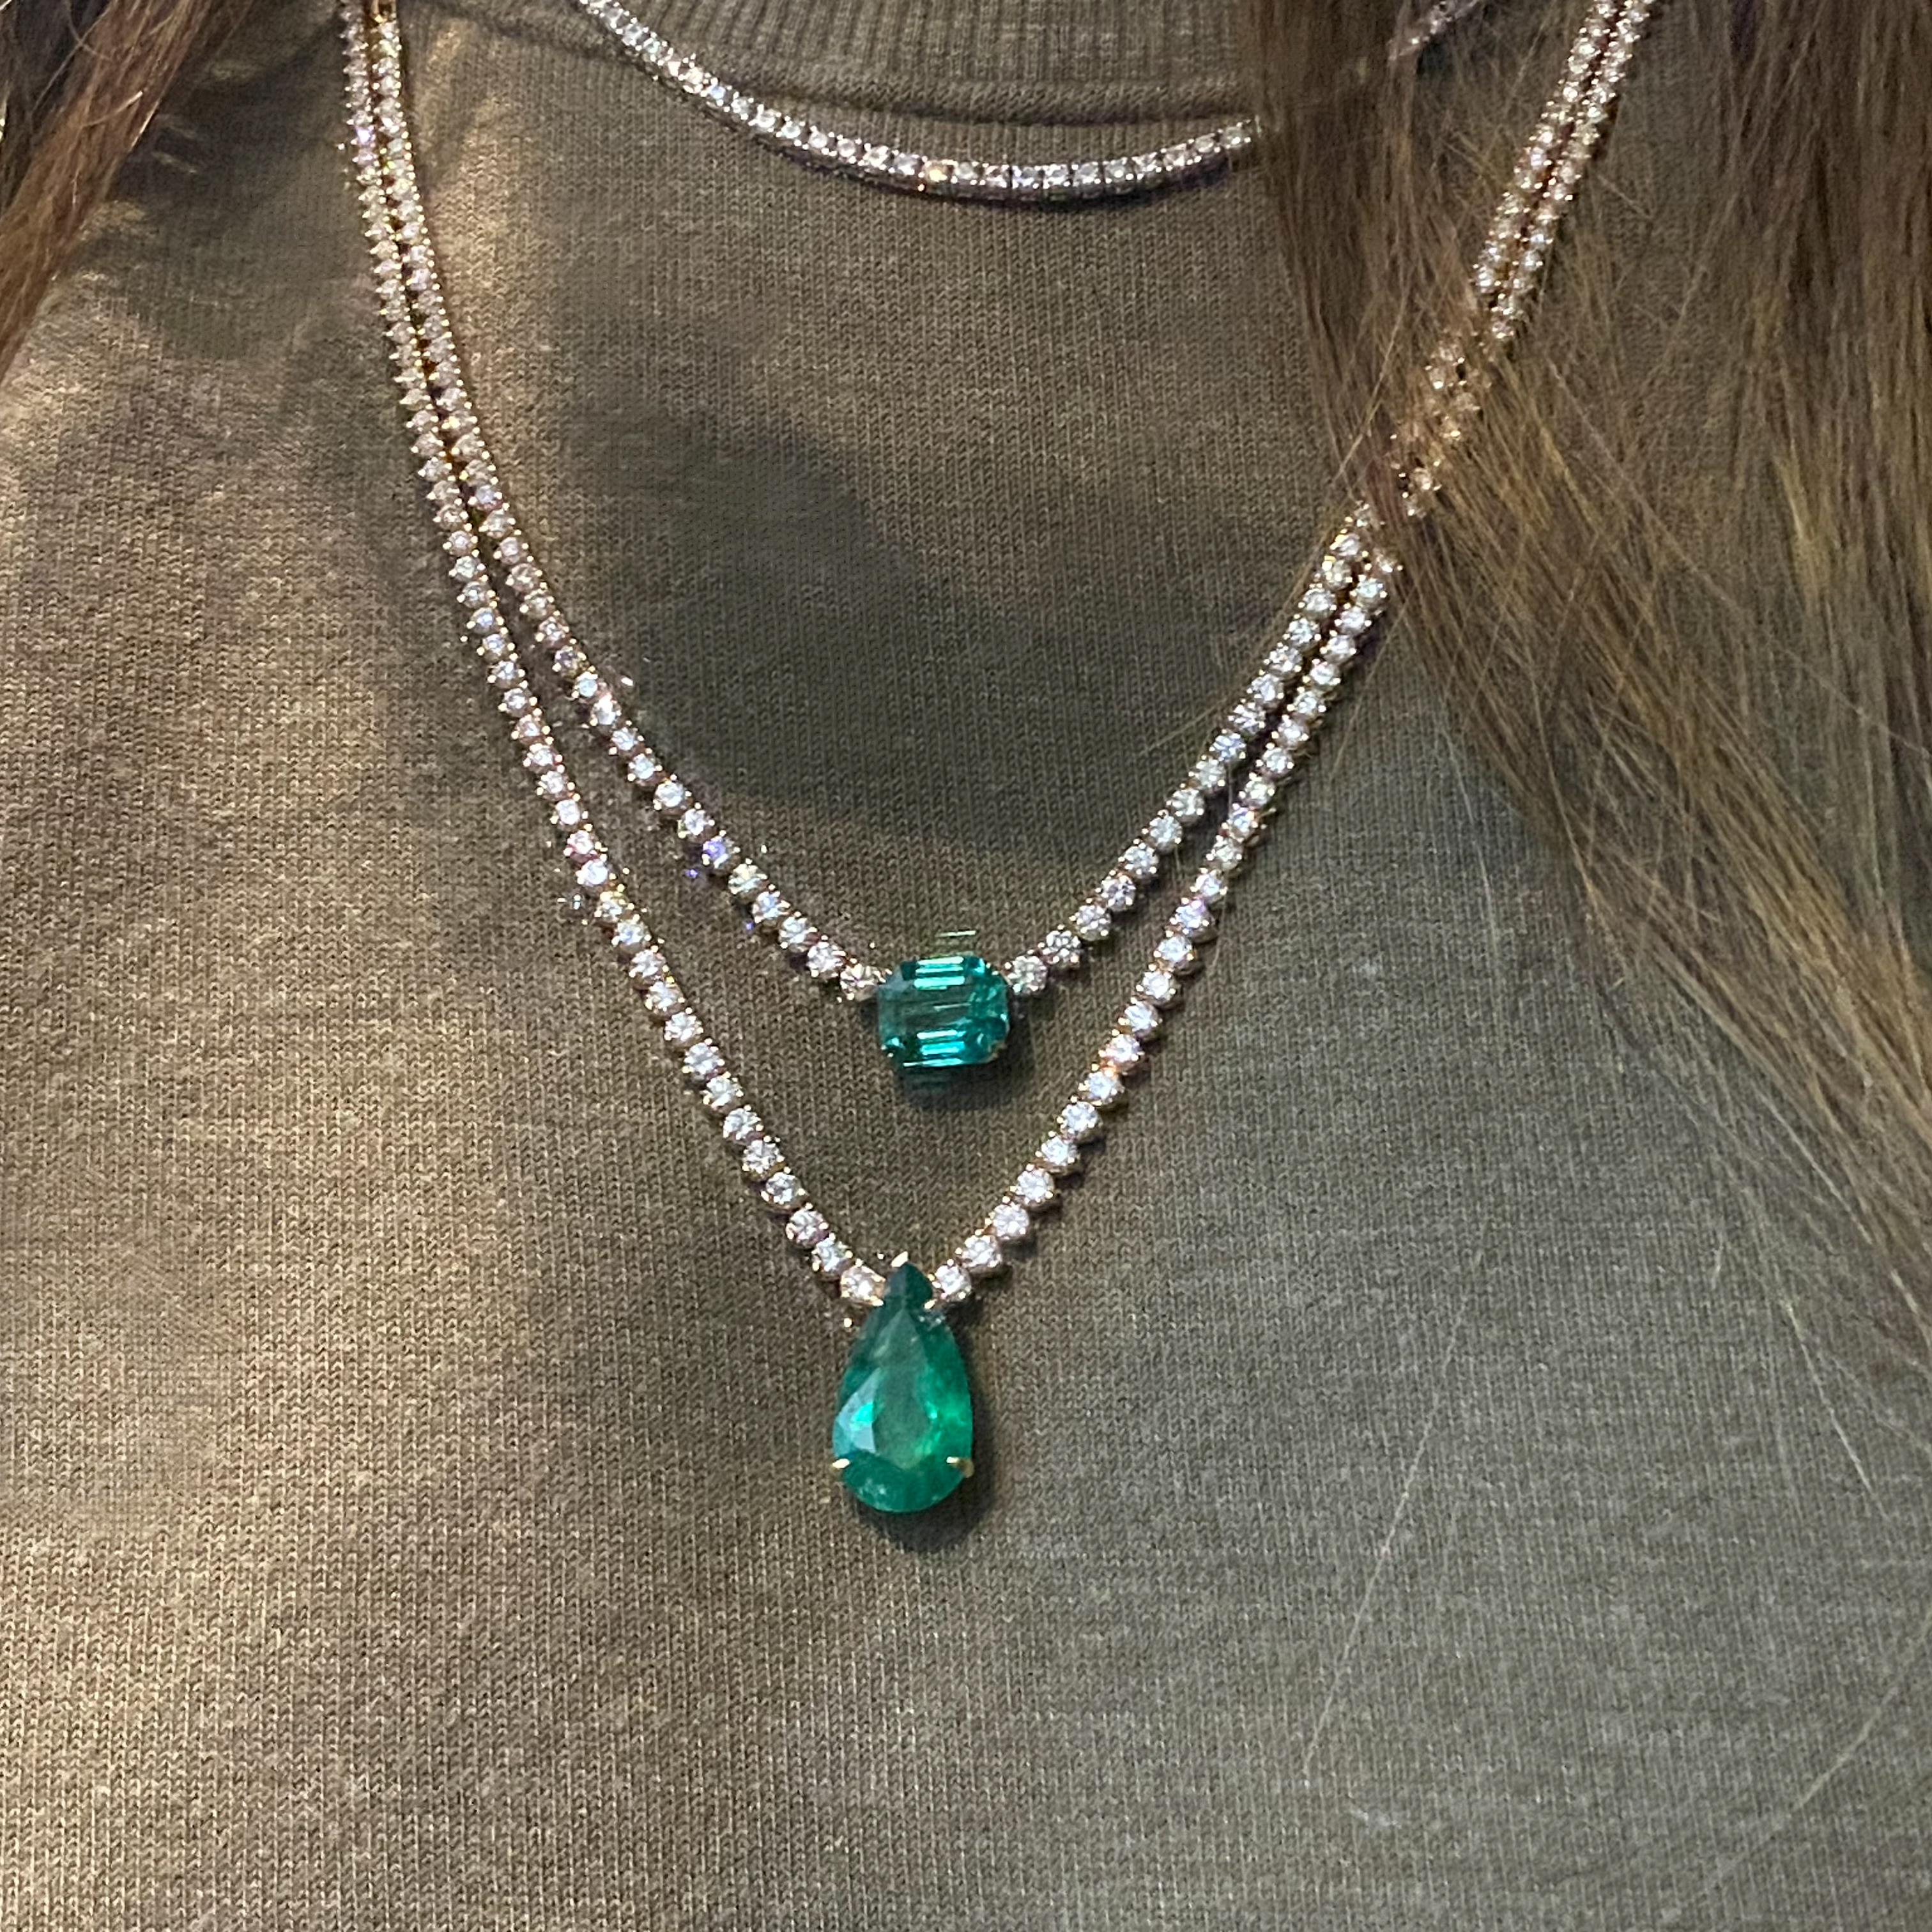 Significant 7.3 ct Emerald drop pendant on a 24-inch, half-way graduated Diamond and chain necklace with 5ct round Diamonds set in 18k yellow gold.

This design is also available in 7.5ct Emerald and all-around Diamond necklace.